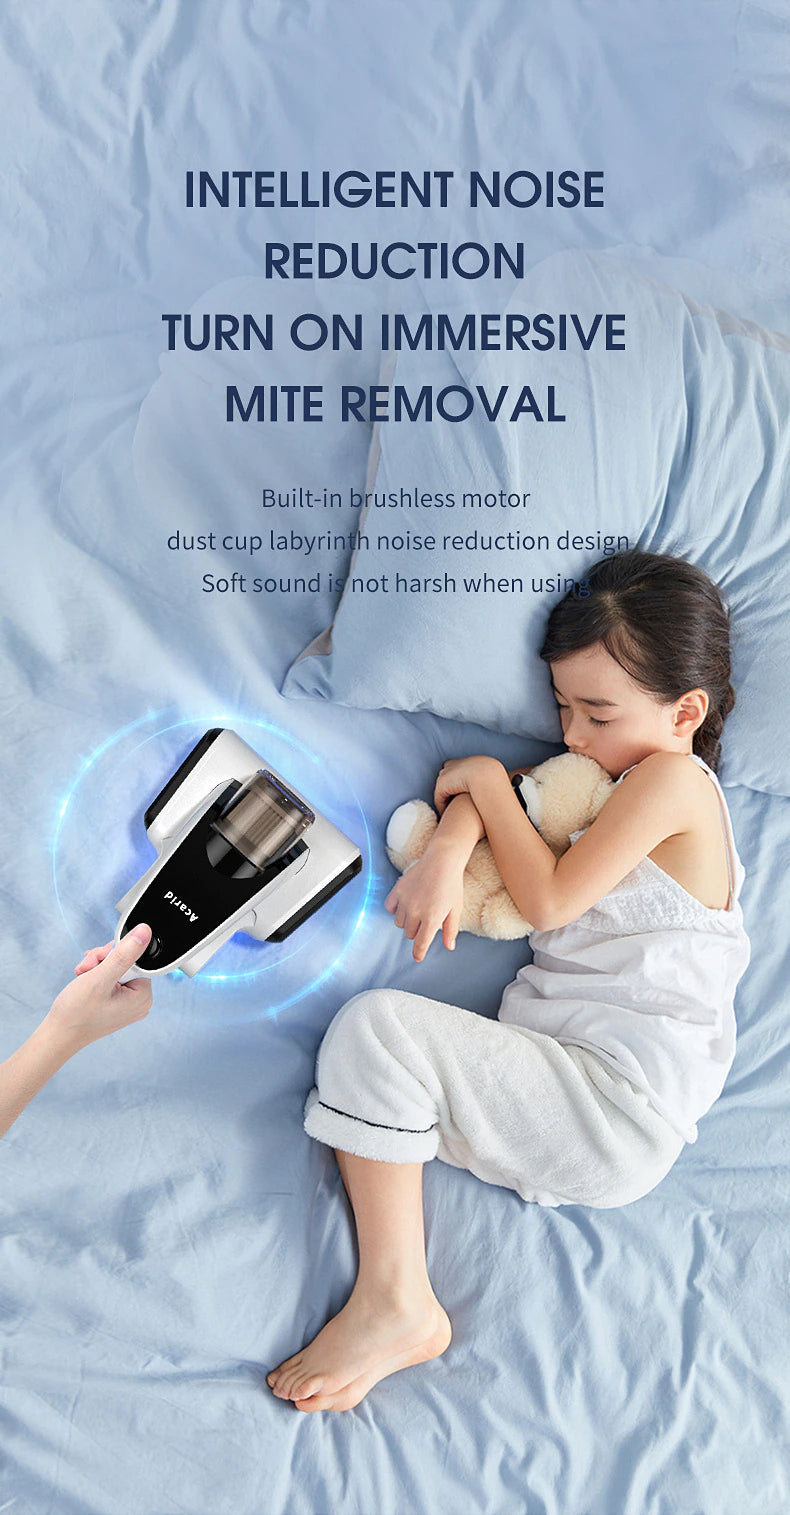 10KPa Mite Removal Vacuum Cleaner Wireless Powerful Suction 2000mah USB Rechargeable Smart Cordless Cleane Accessories for Home